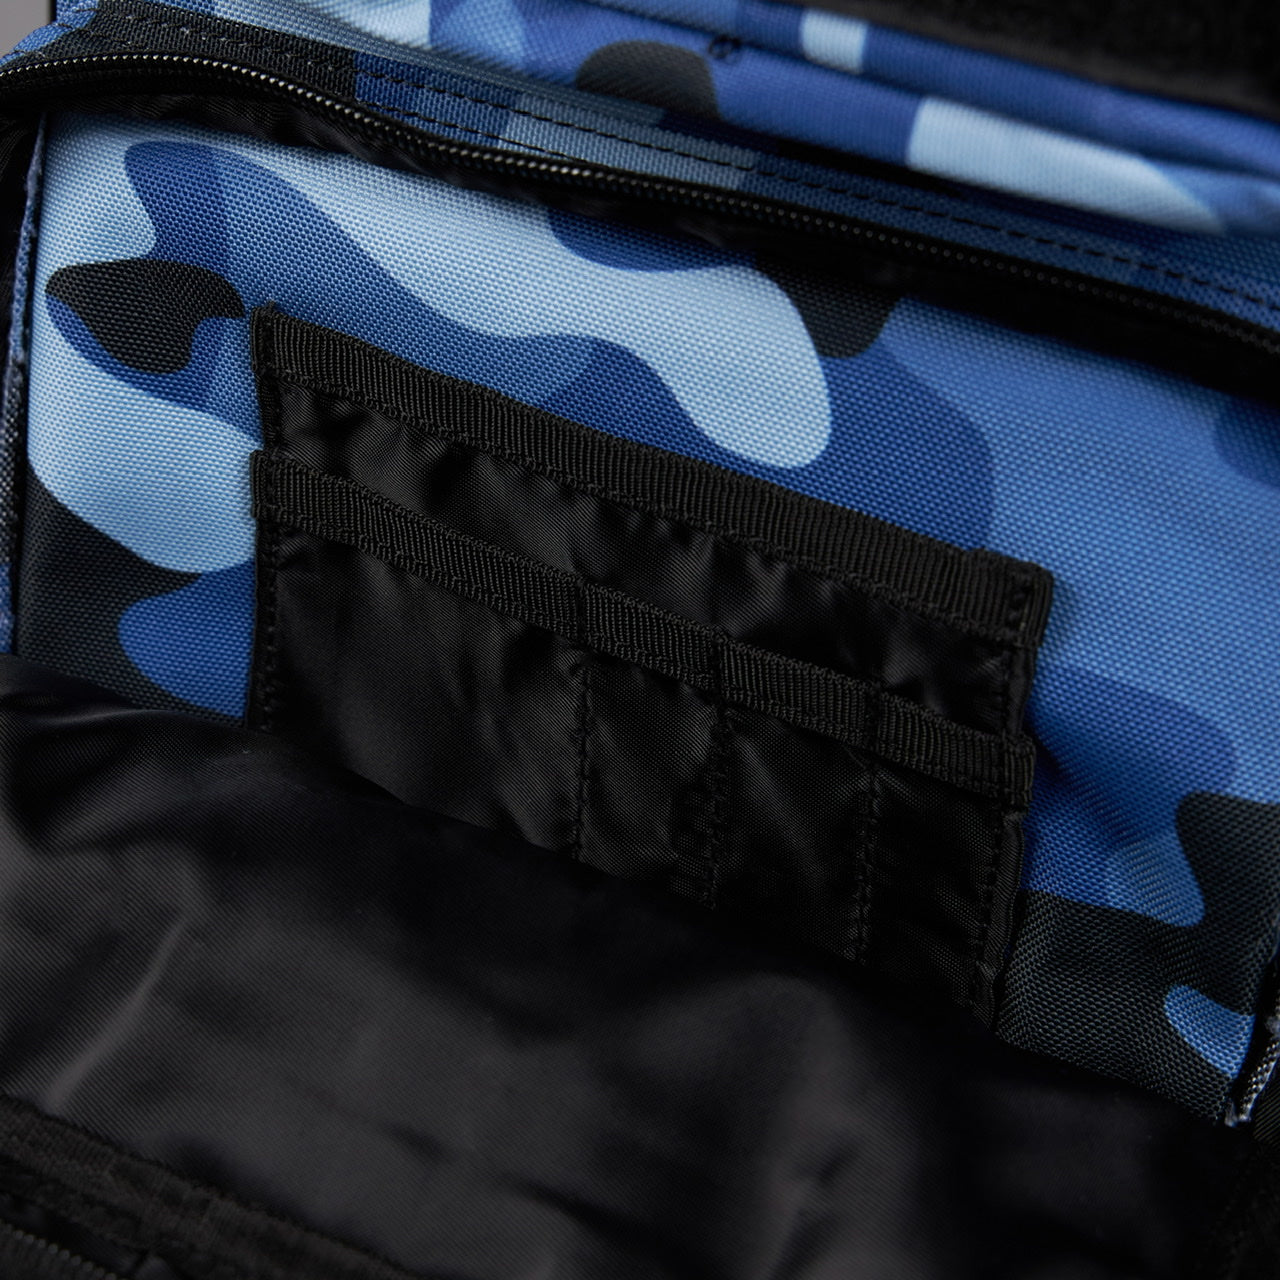 25L Backpack Black And Blue Camo